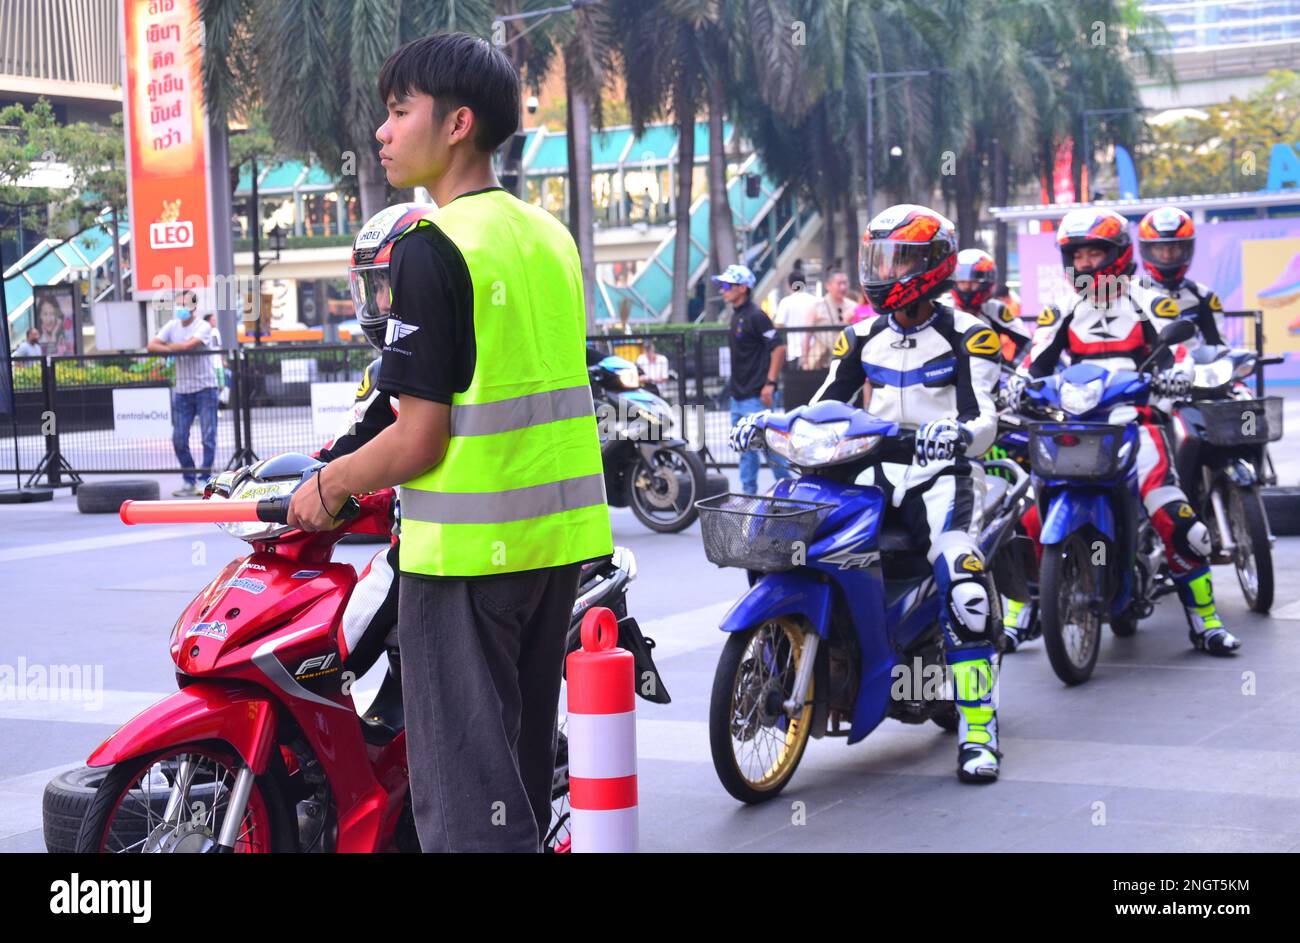 Young men take part in a motorcycling event, organised by Thailand's National Sports Development Fund (NSDF), at Central World shopping mall, Bangkok, Thailand, Asia on 19th February, 2023. Young male motorcyclists display safe use of a motorbike. Thailand's roads have the most  deaths in Southeast Asia with the ninth greatest rate of road fatalities in the world at 32.7 per 100,000 people each year, says the World Health Organization. Some 20,000 people die on Thailand's roads each year. Stock Photo